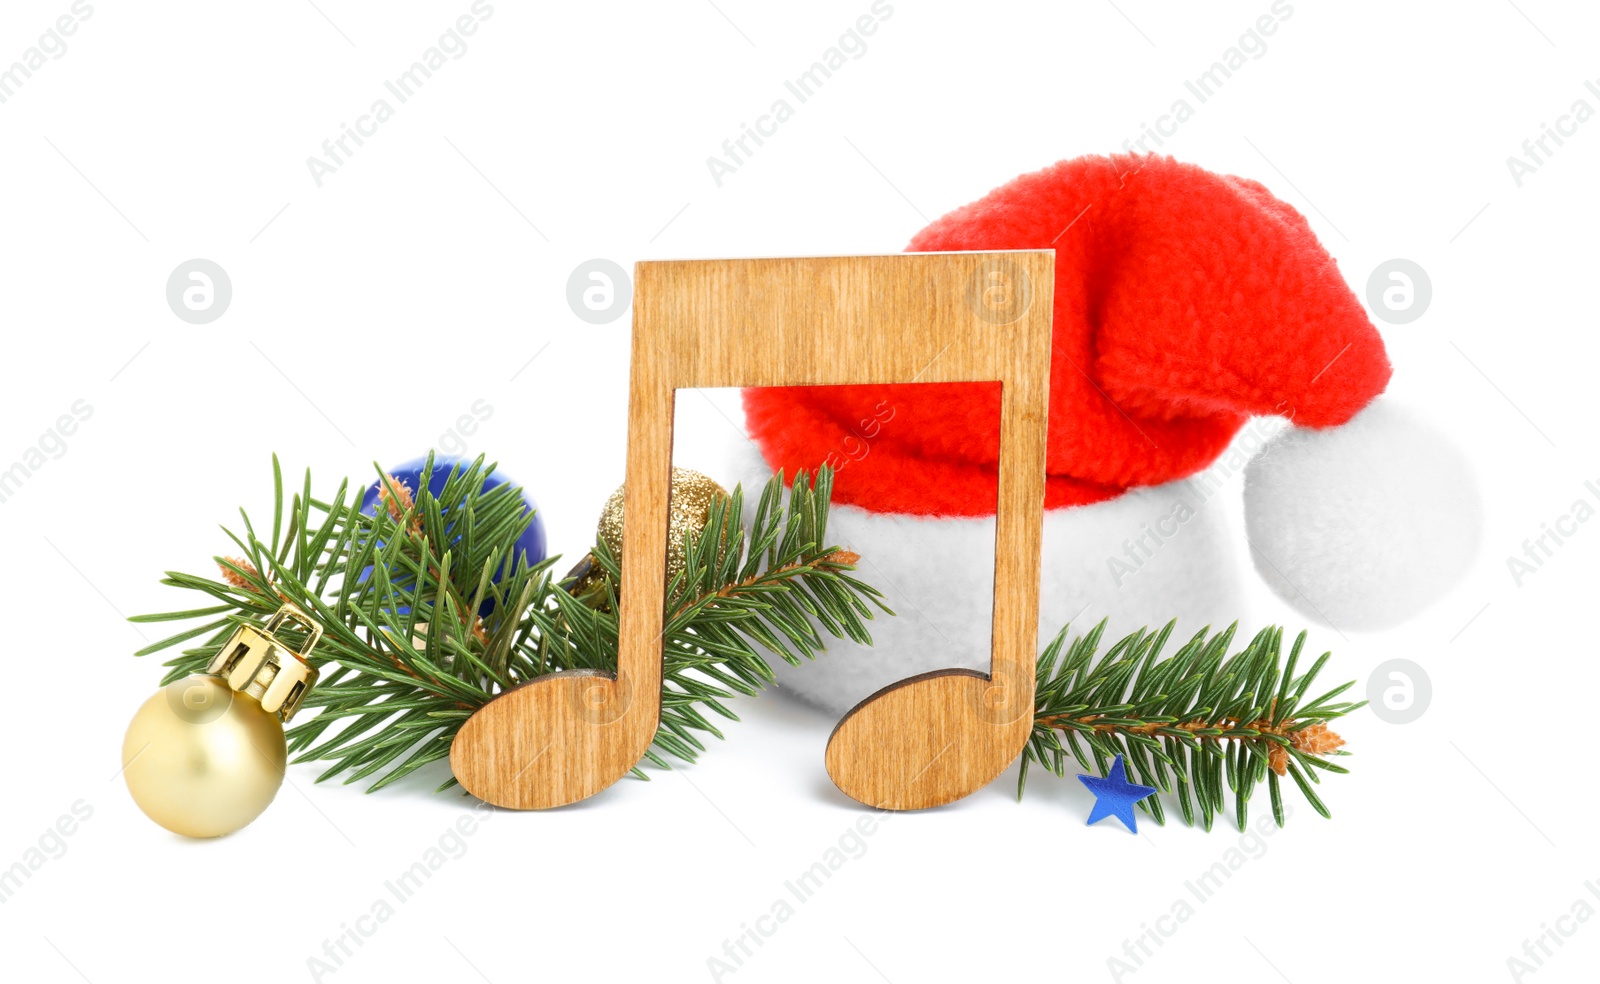 Photo of Wooden music note with Santa hat, fir tree branches and Christmas decor on white background